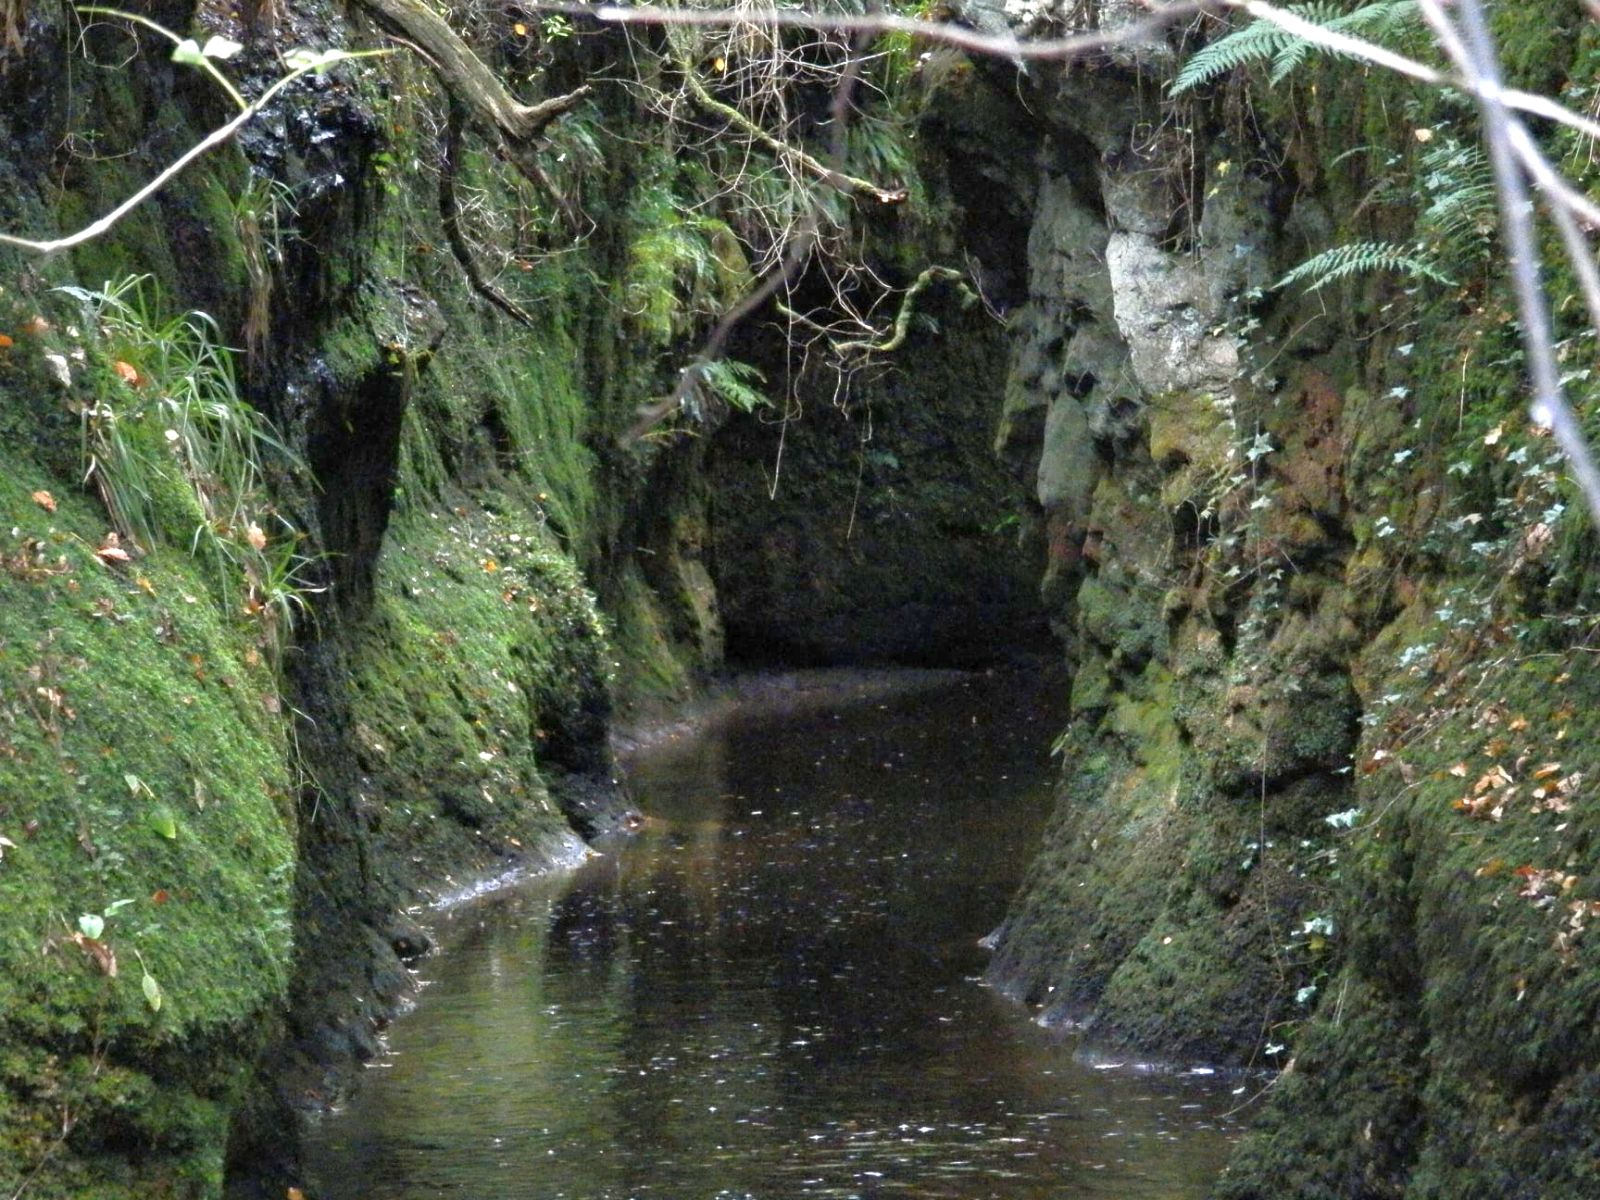 The "Whale's Belly"  in the gorge of Boquhan Burn